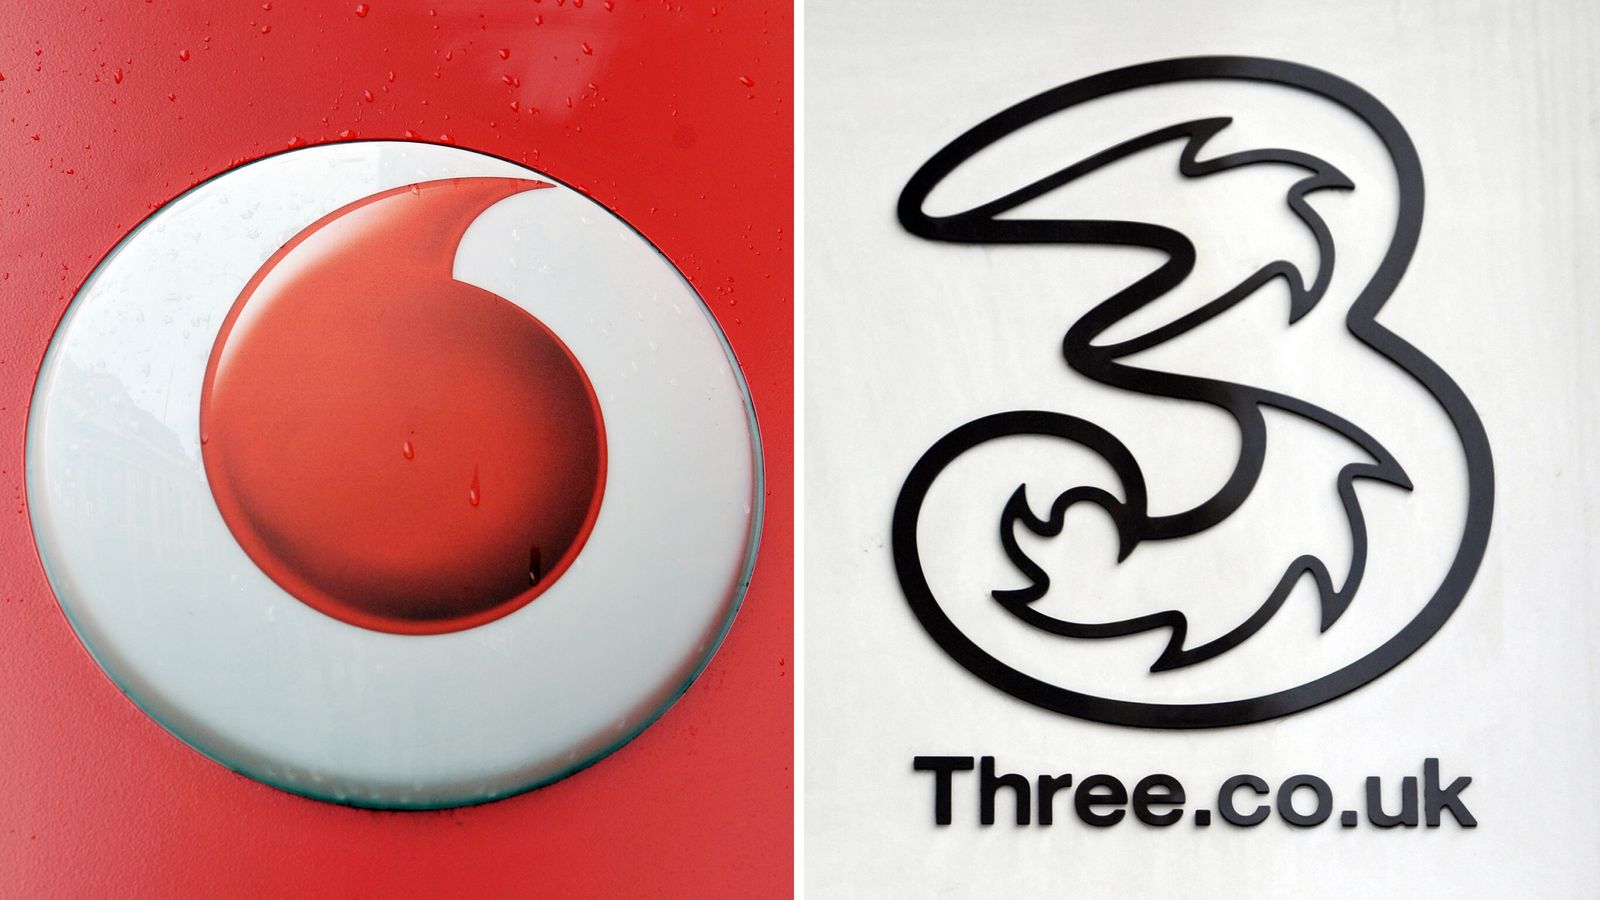 Vodafone and Three merger in doubt amid price hike concerns